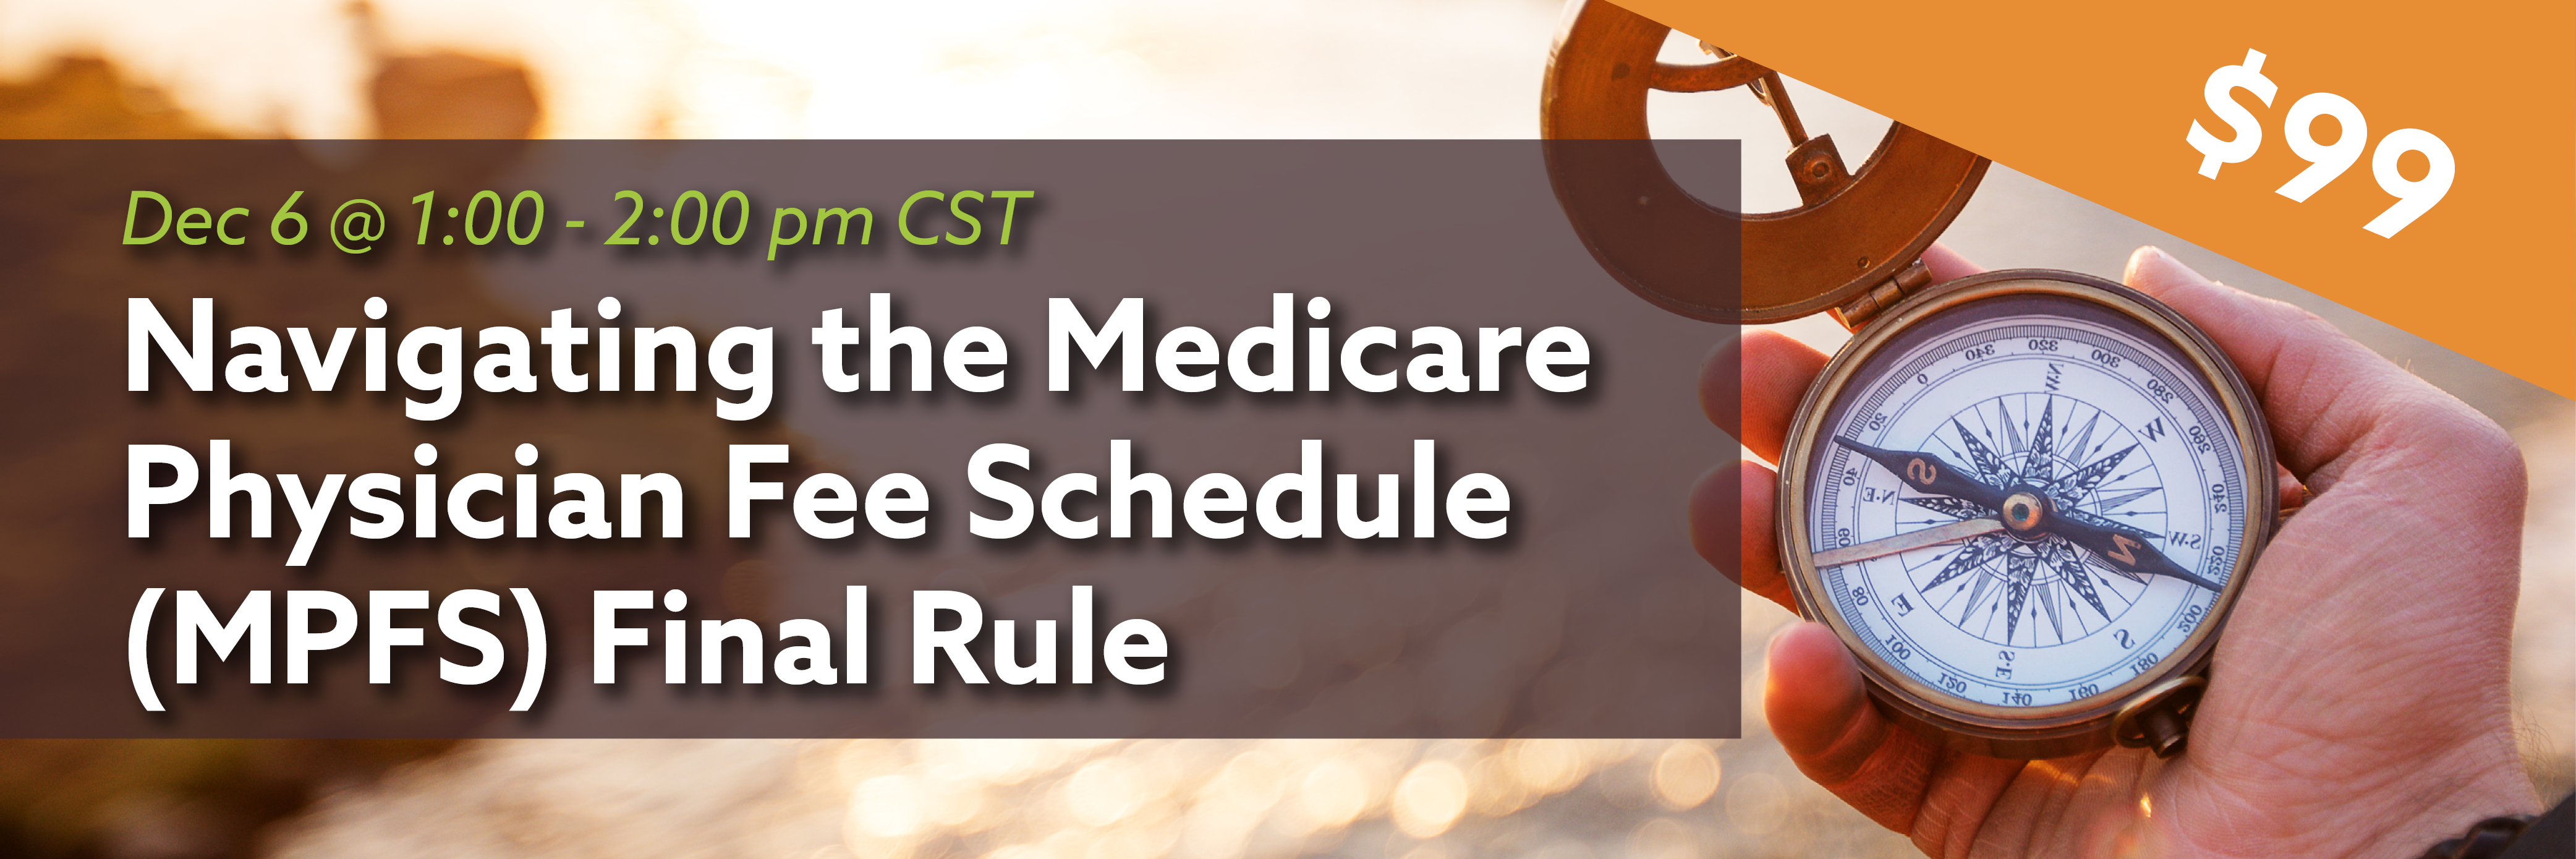 Dec 6 @ 1:00 - 2:00 pm CST, Navigating the Medicare Physician Fee Schedule (MPFS) Final Rule